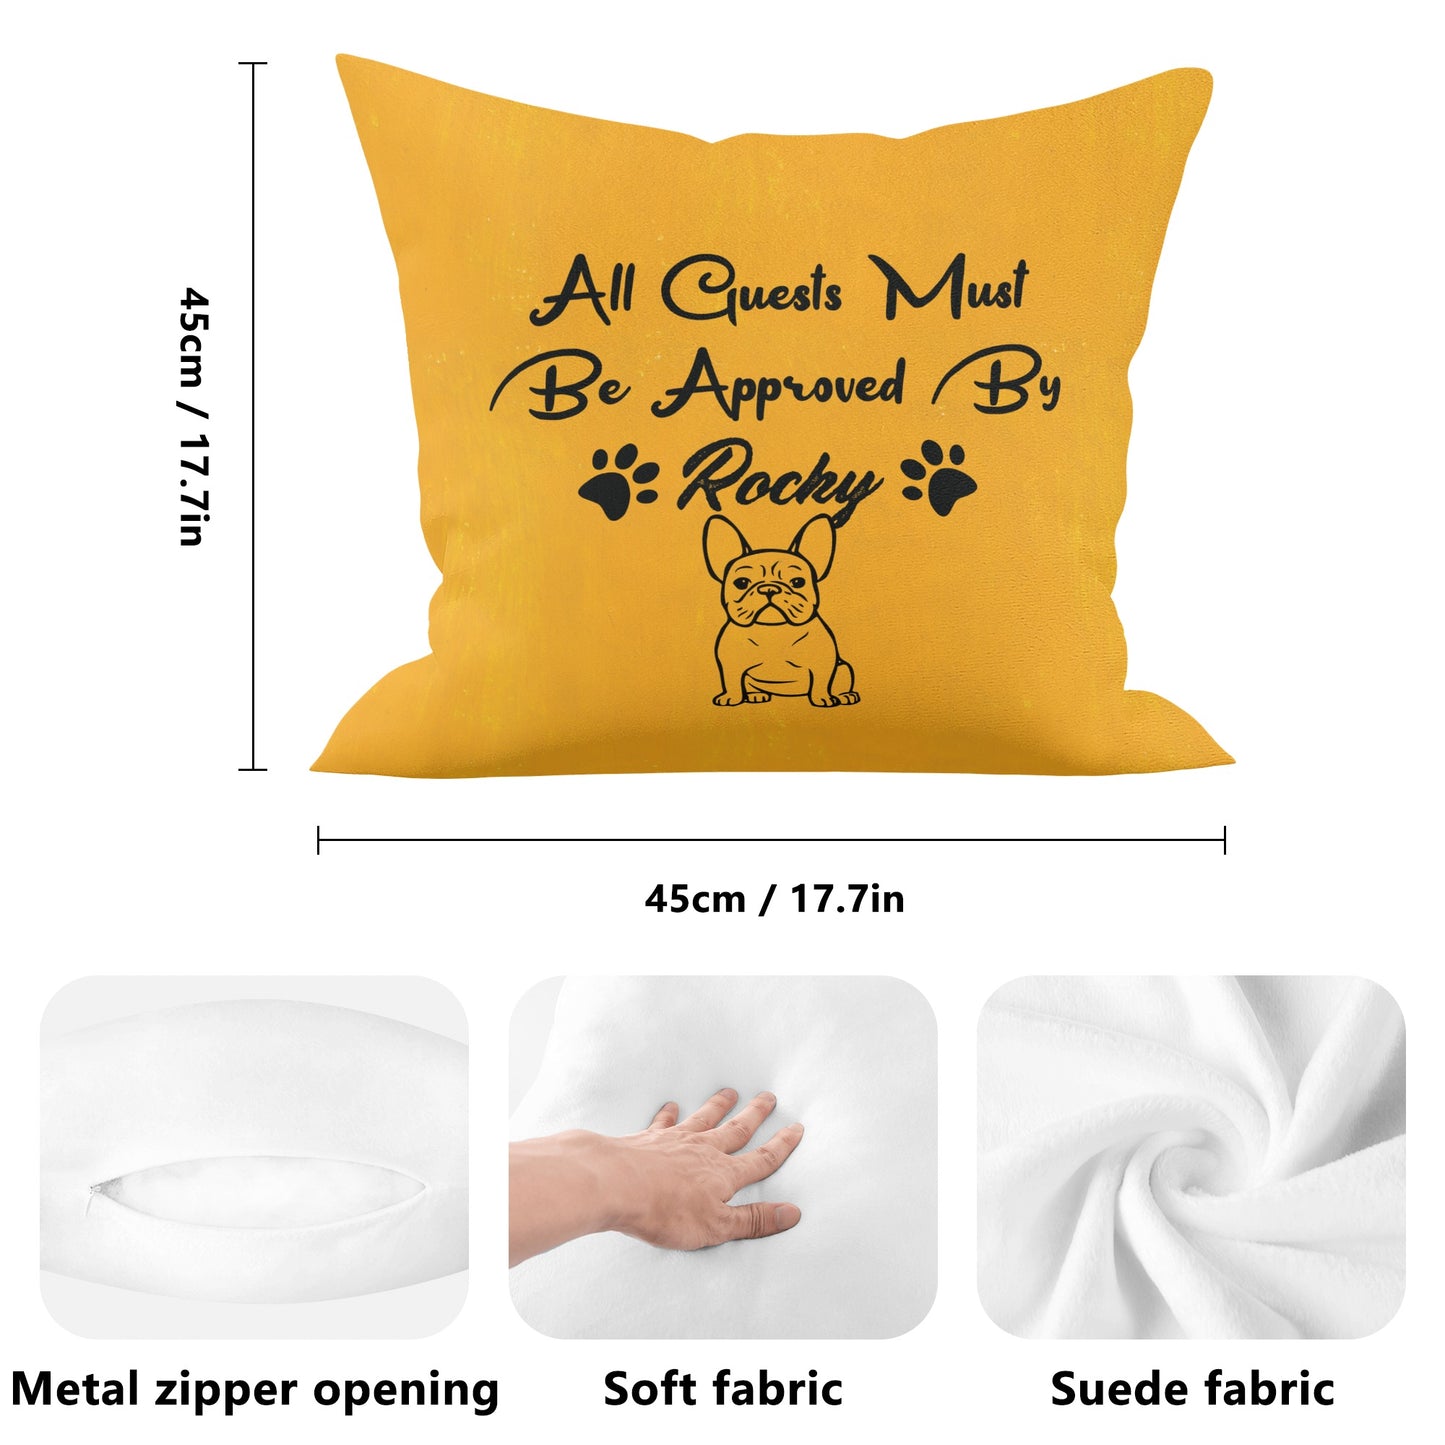 Must Be Approved - Personalized Pillow